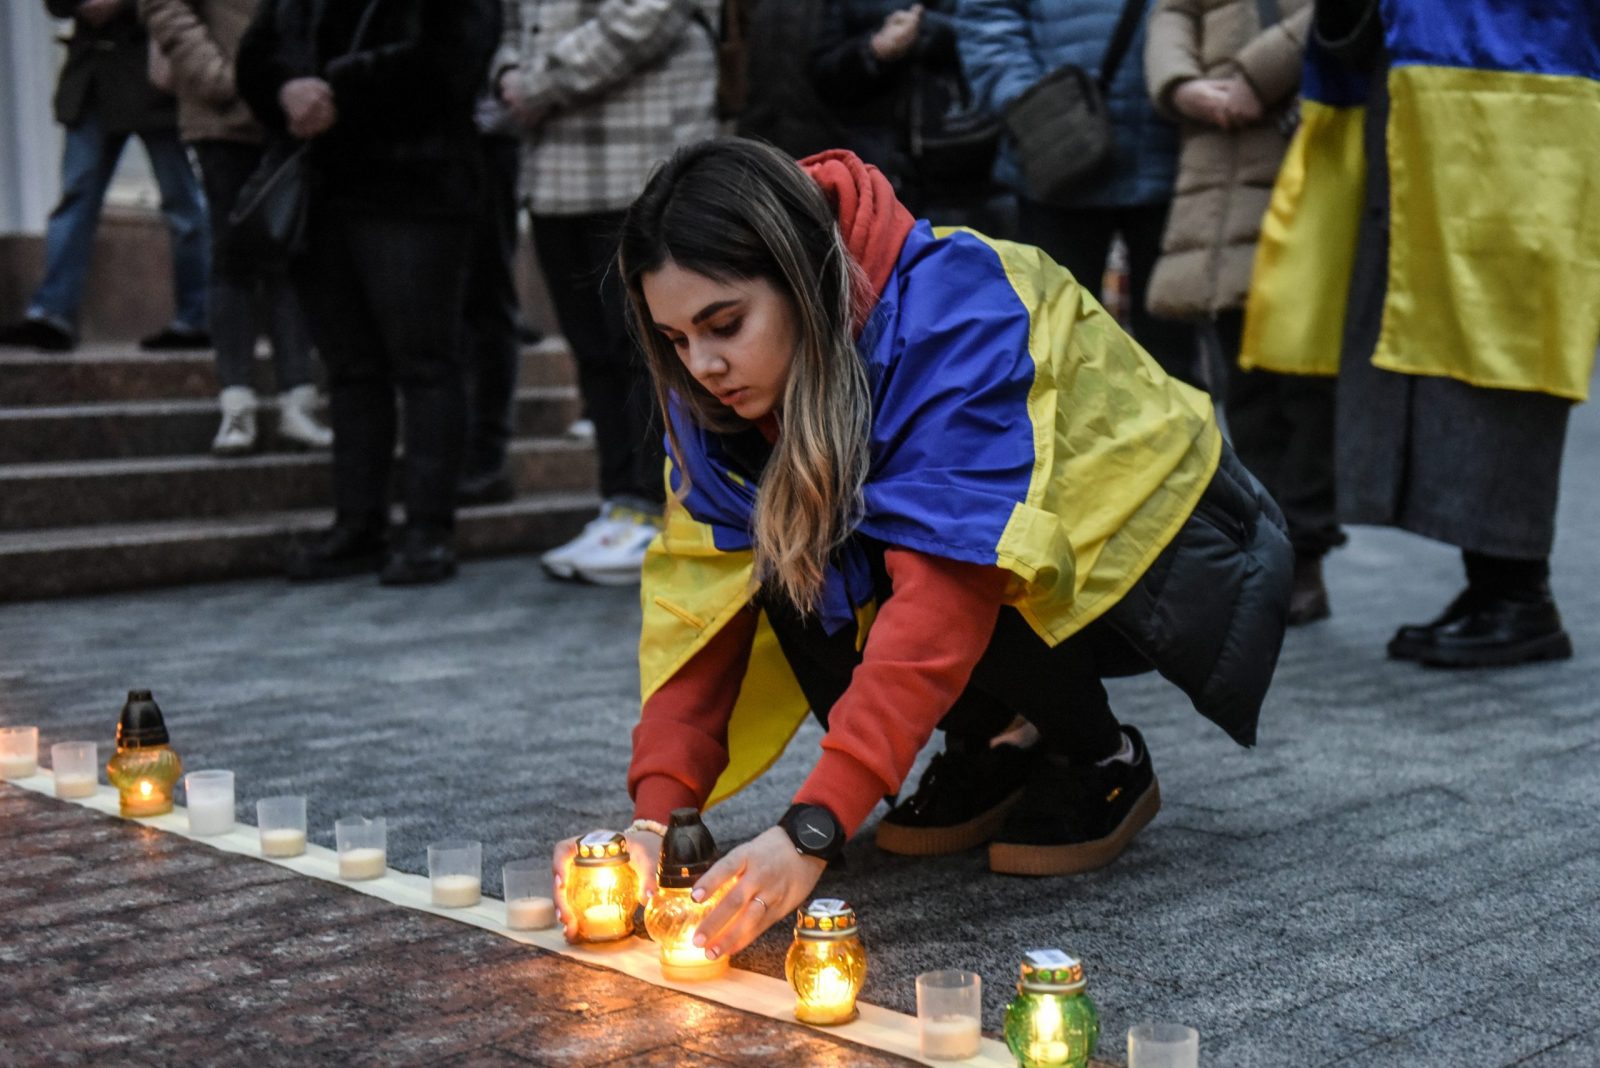 epa10526968 A woman lights candles and arranges them to form the word 'Children' as they attend a commemorative rally to mark the first anniversary of the bombing of the Mariupol Drama Theatre, in front of the National Opera of Ukraine in Kyiv (Kiev), Ukraine, 16 March 2023. The Drama Theater was destroyed on 16 March 2022 during Russian airstrikes and the siege of the southern Ukrainian port city of Mariupol. According to Amnesty International Ukraine at least 300 people died in the attack on the theatre, where a large number of civilians were hiding and the word 'Children' was written outside the building. Russian troops entered Ukrainian territory on 24 February 2022, starting a conflict that has provoked destruction and a humanitarian crisis.  EPA/OLEG PETRASYUK